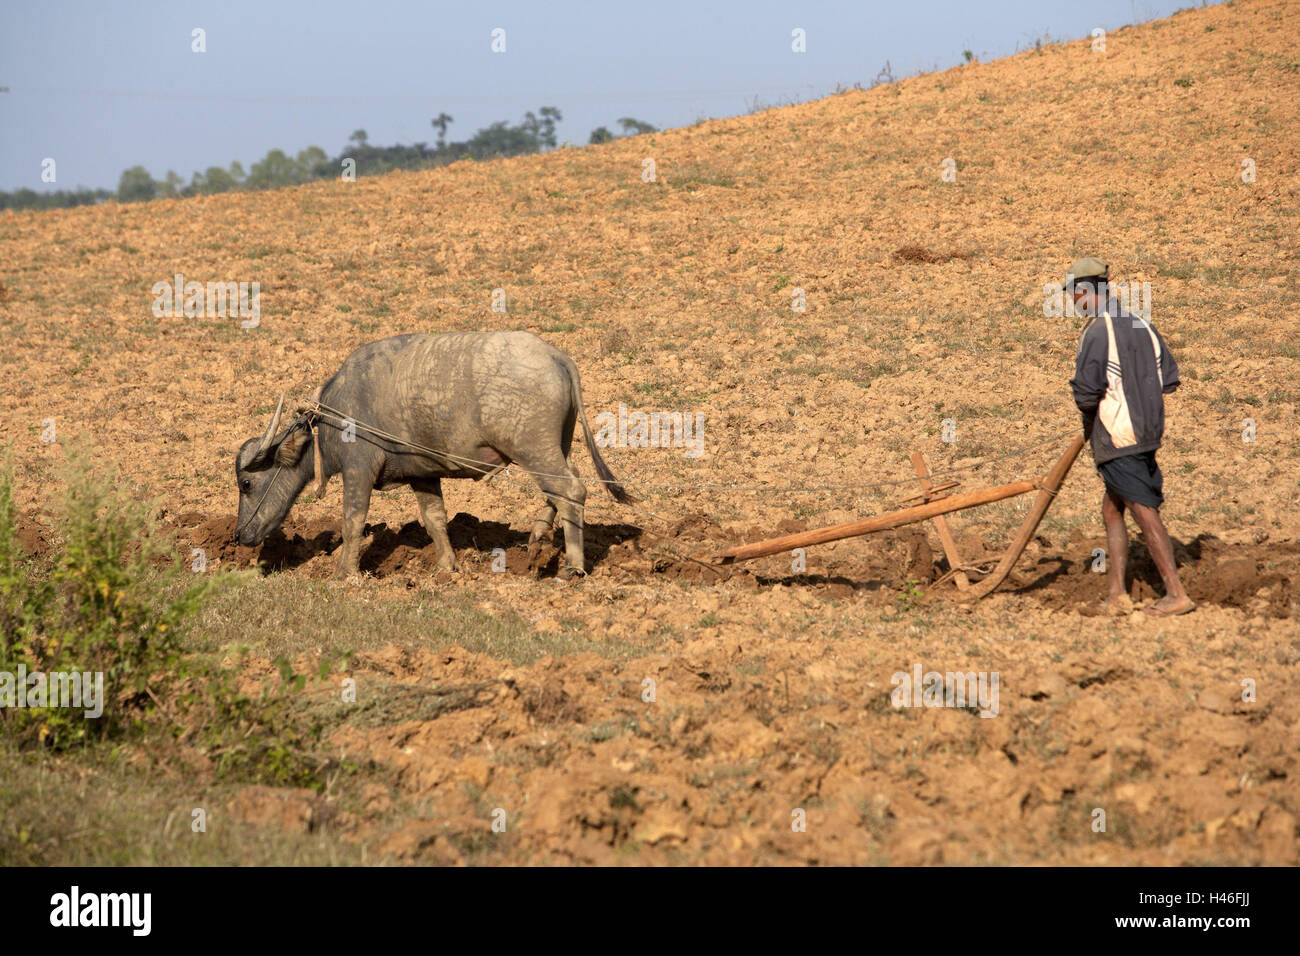 Myanmar, agricultural laborer, ox's plough, Stock Photo